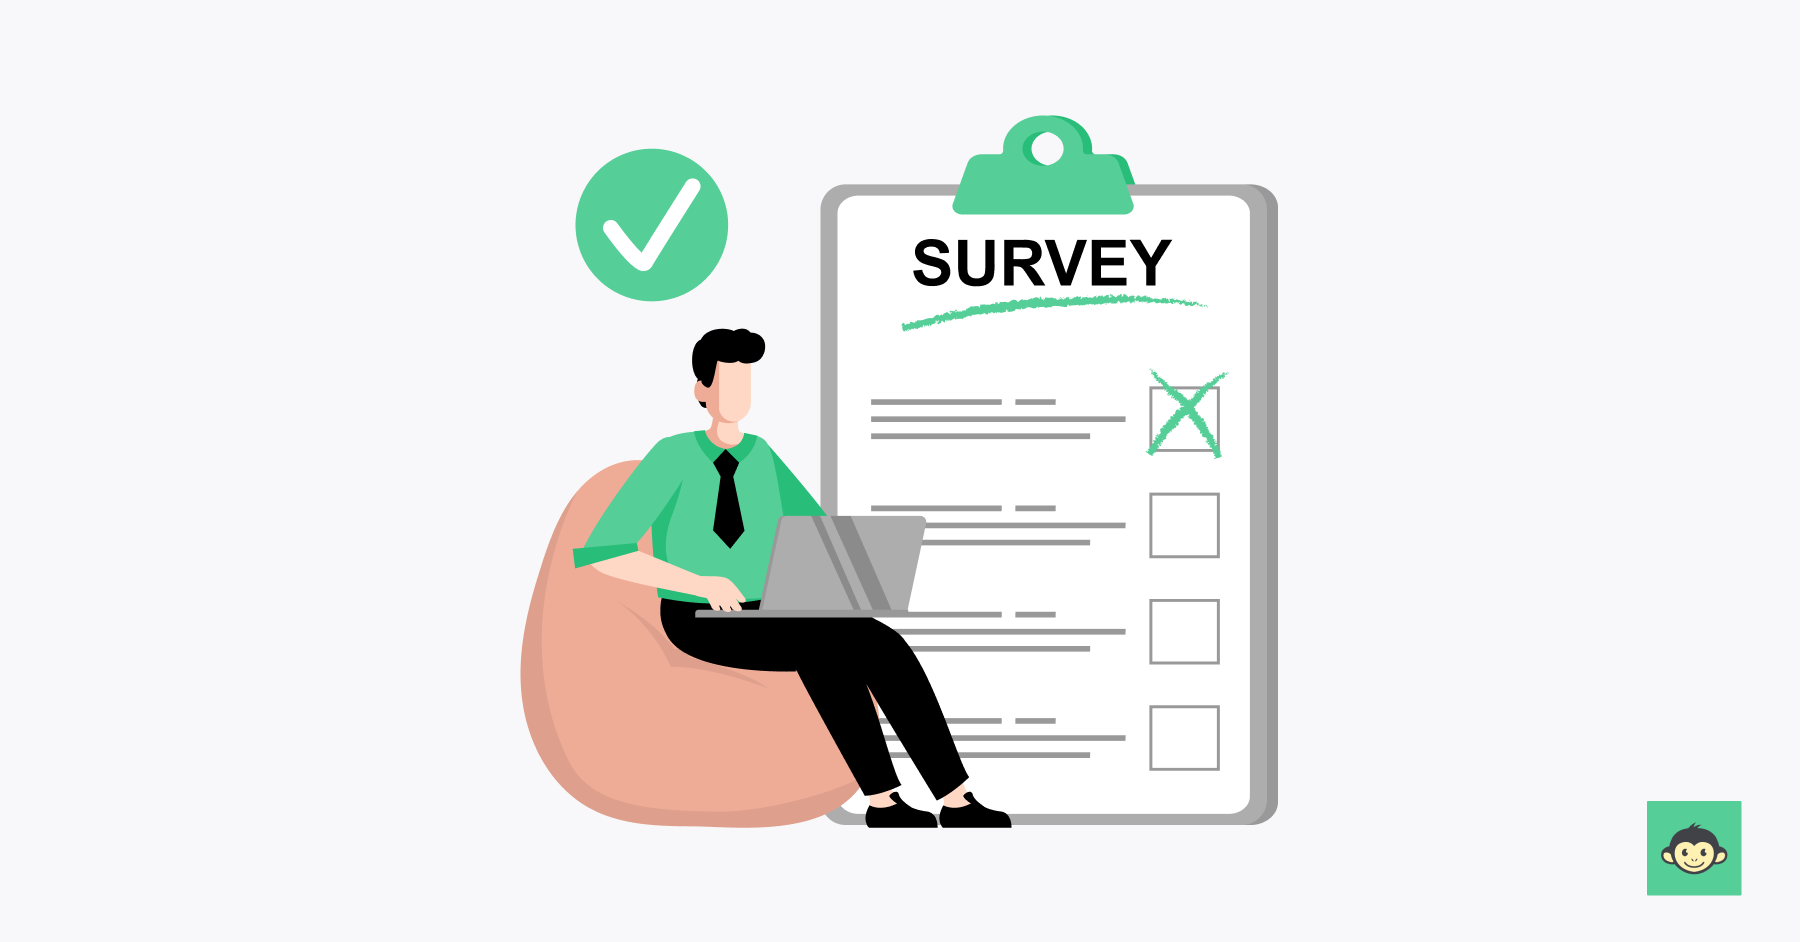 What are employee survey templates?